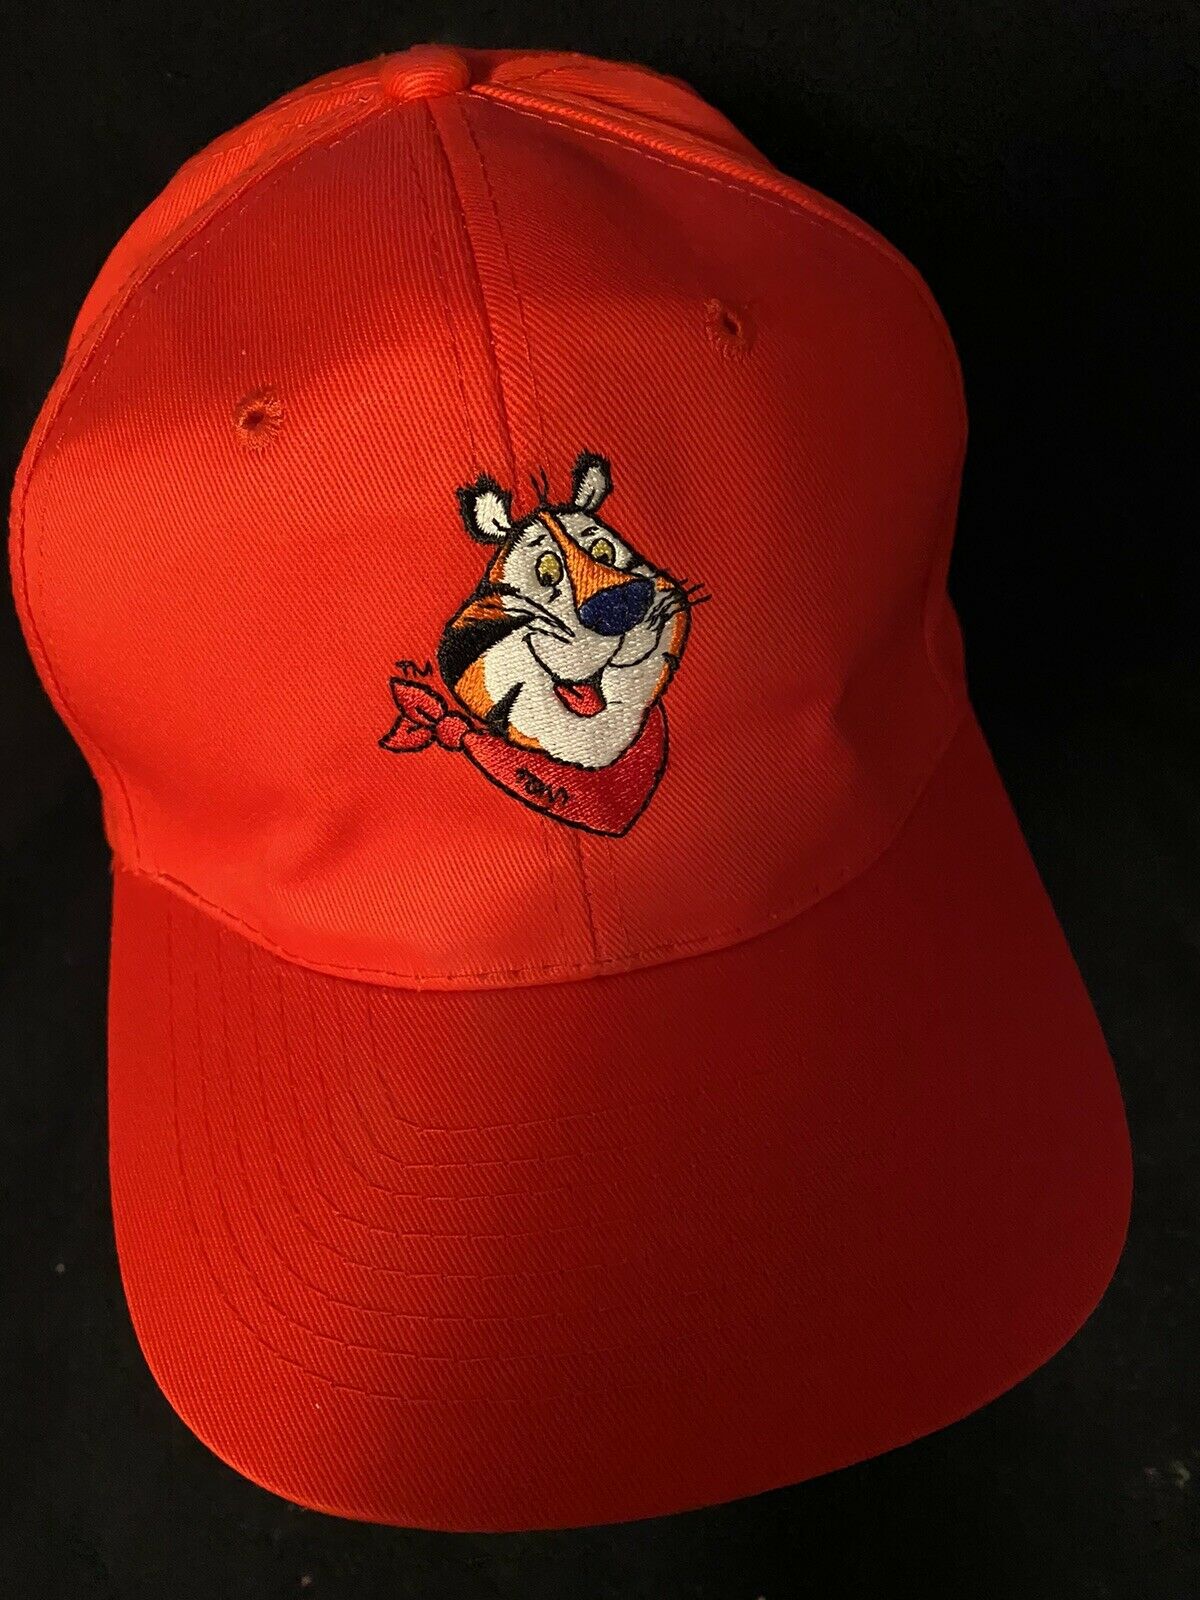 Rare New Vintage (1993) Red Kellogg's Tony The Tiger Frosted Flakes Baseball Cap